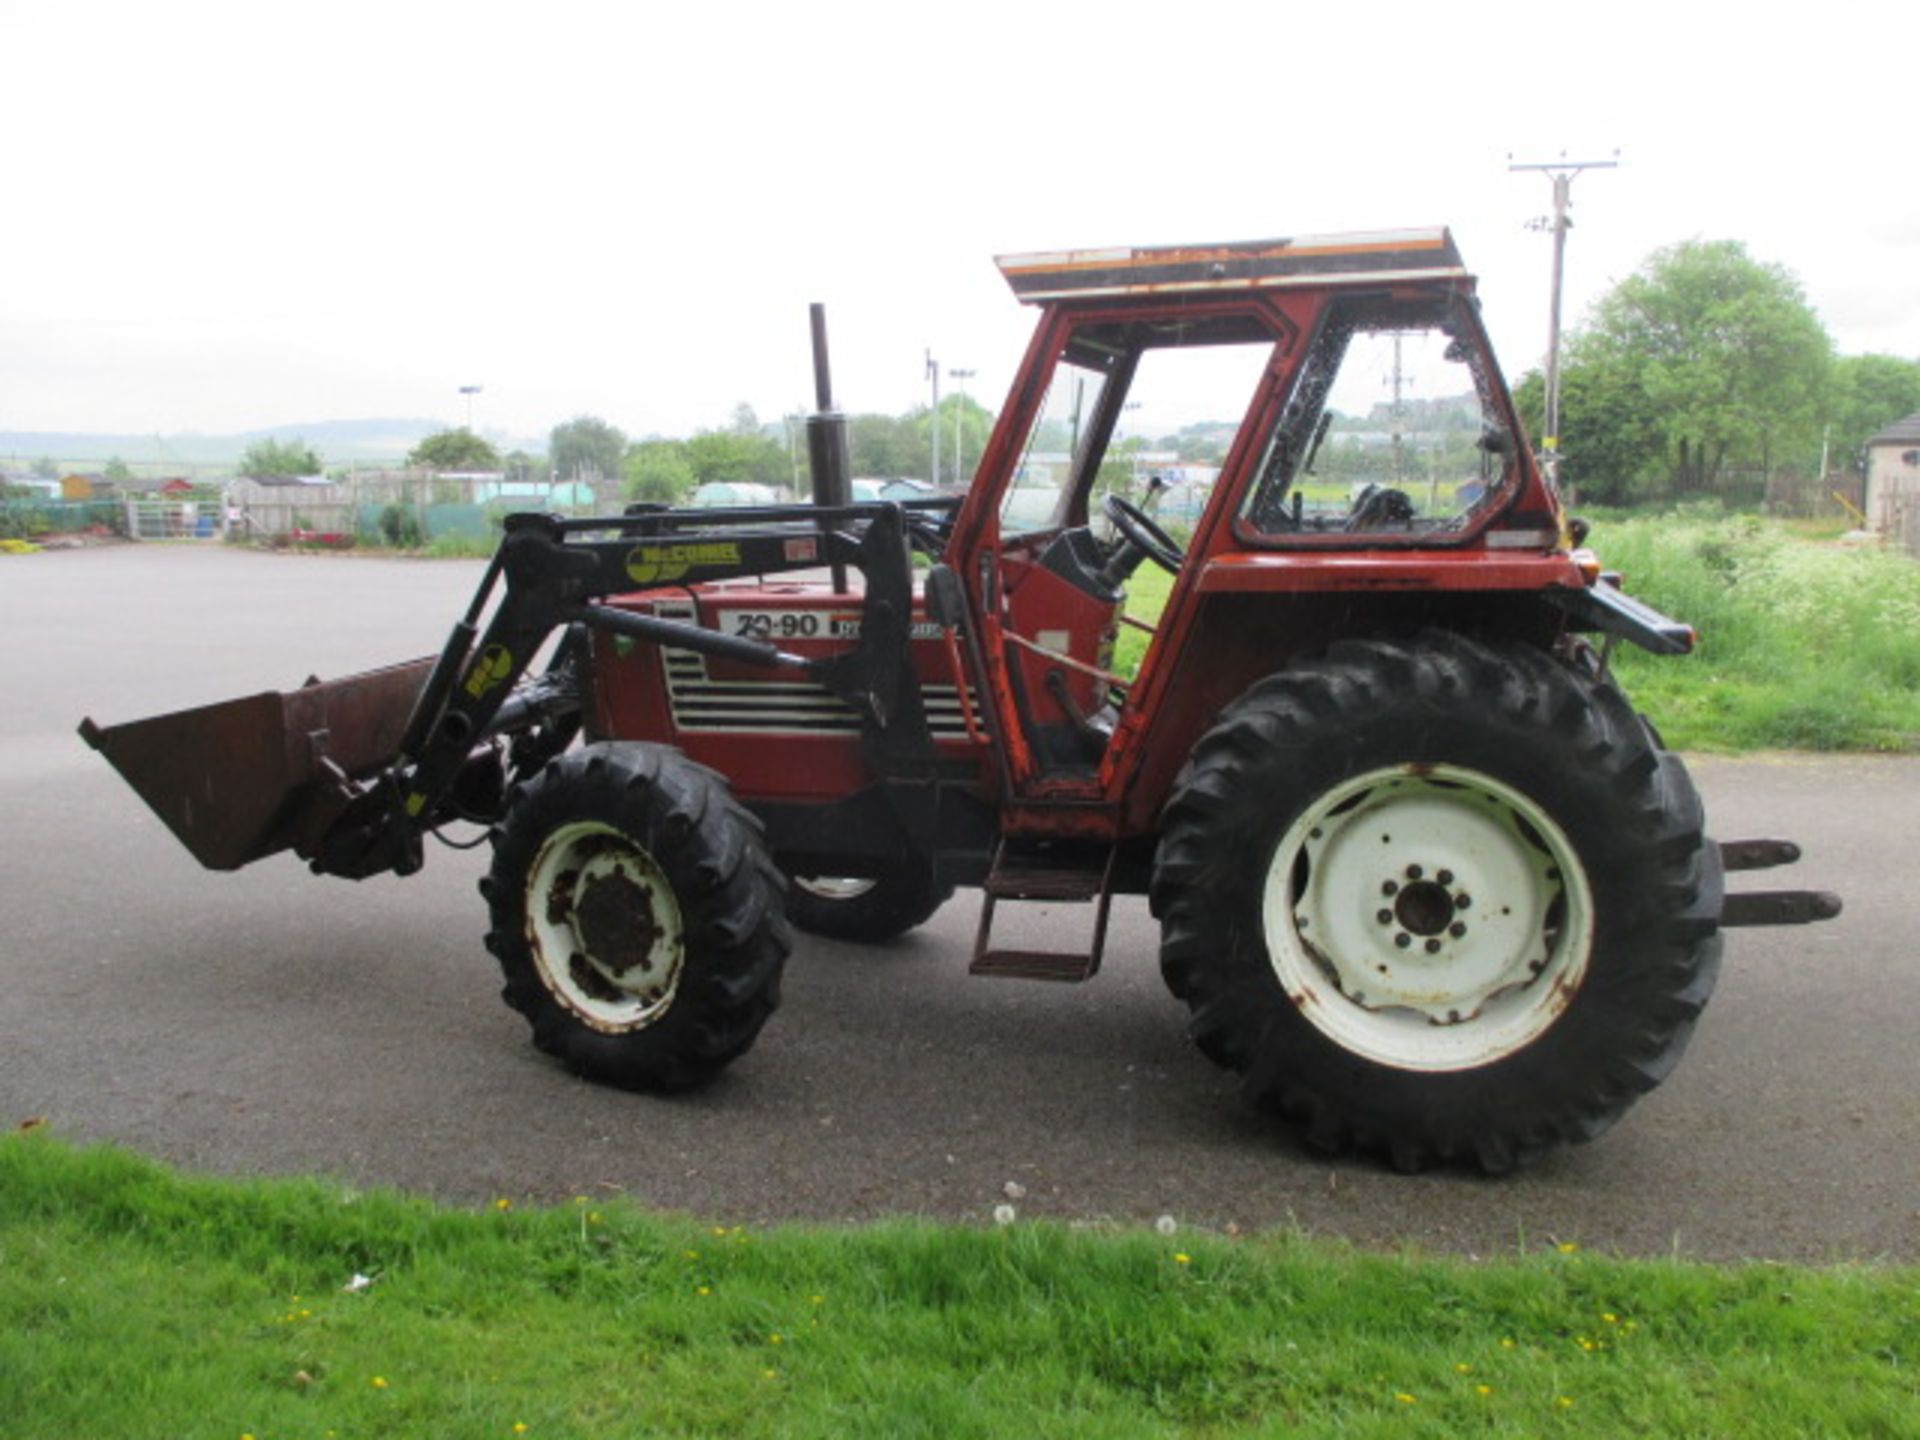 Fiat 70-90 4wd Tractor c/w McConnel 065 power loader, bucket and manual. First registered in Feb